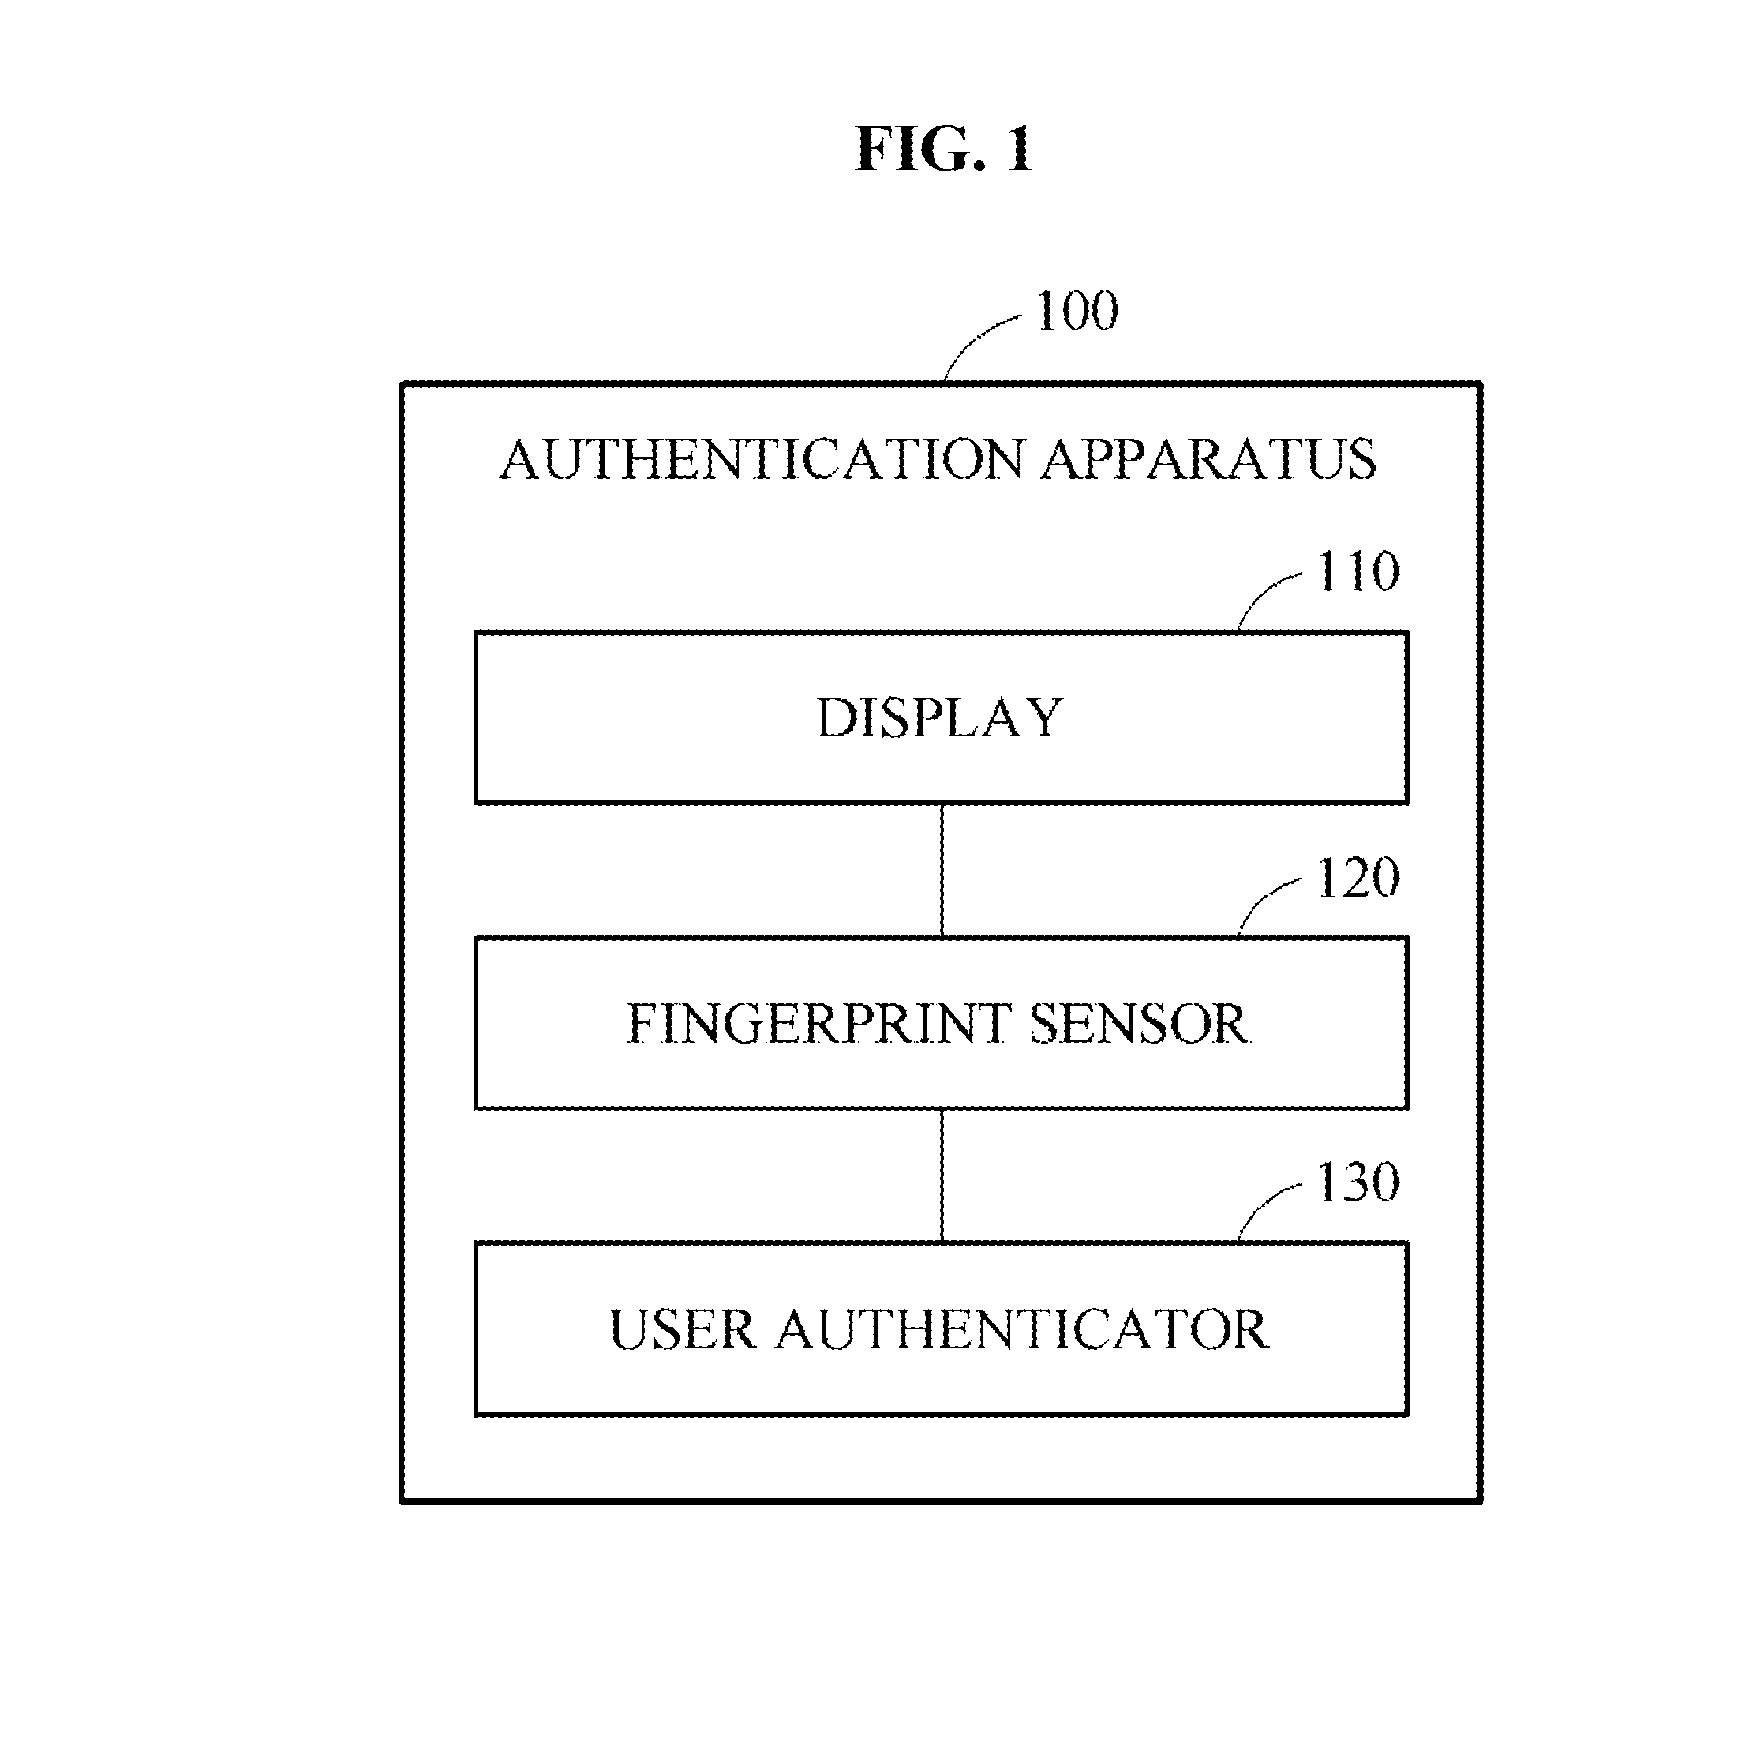 Method and apparatus for authentication based on fingerprint recognition